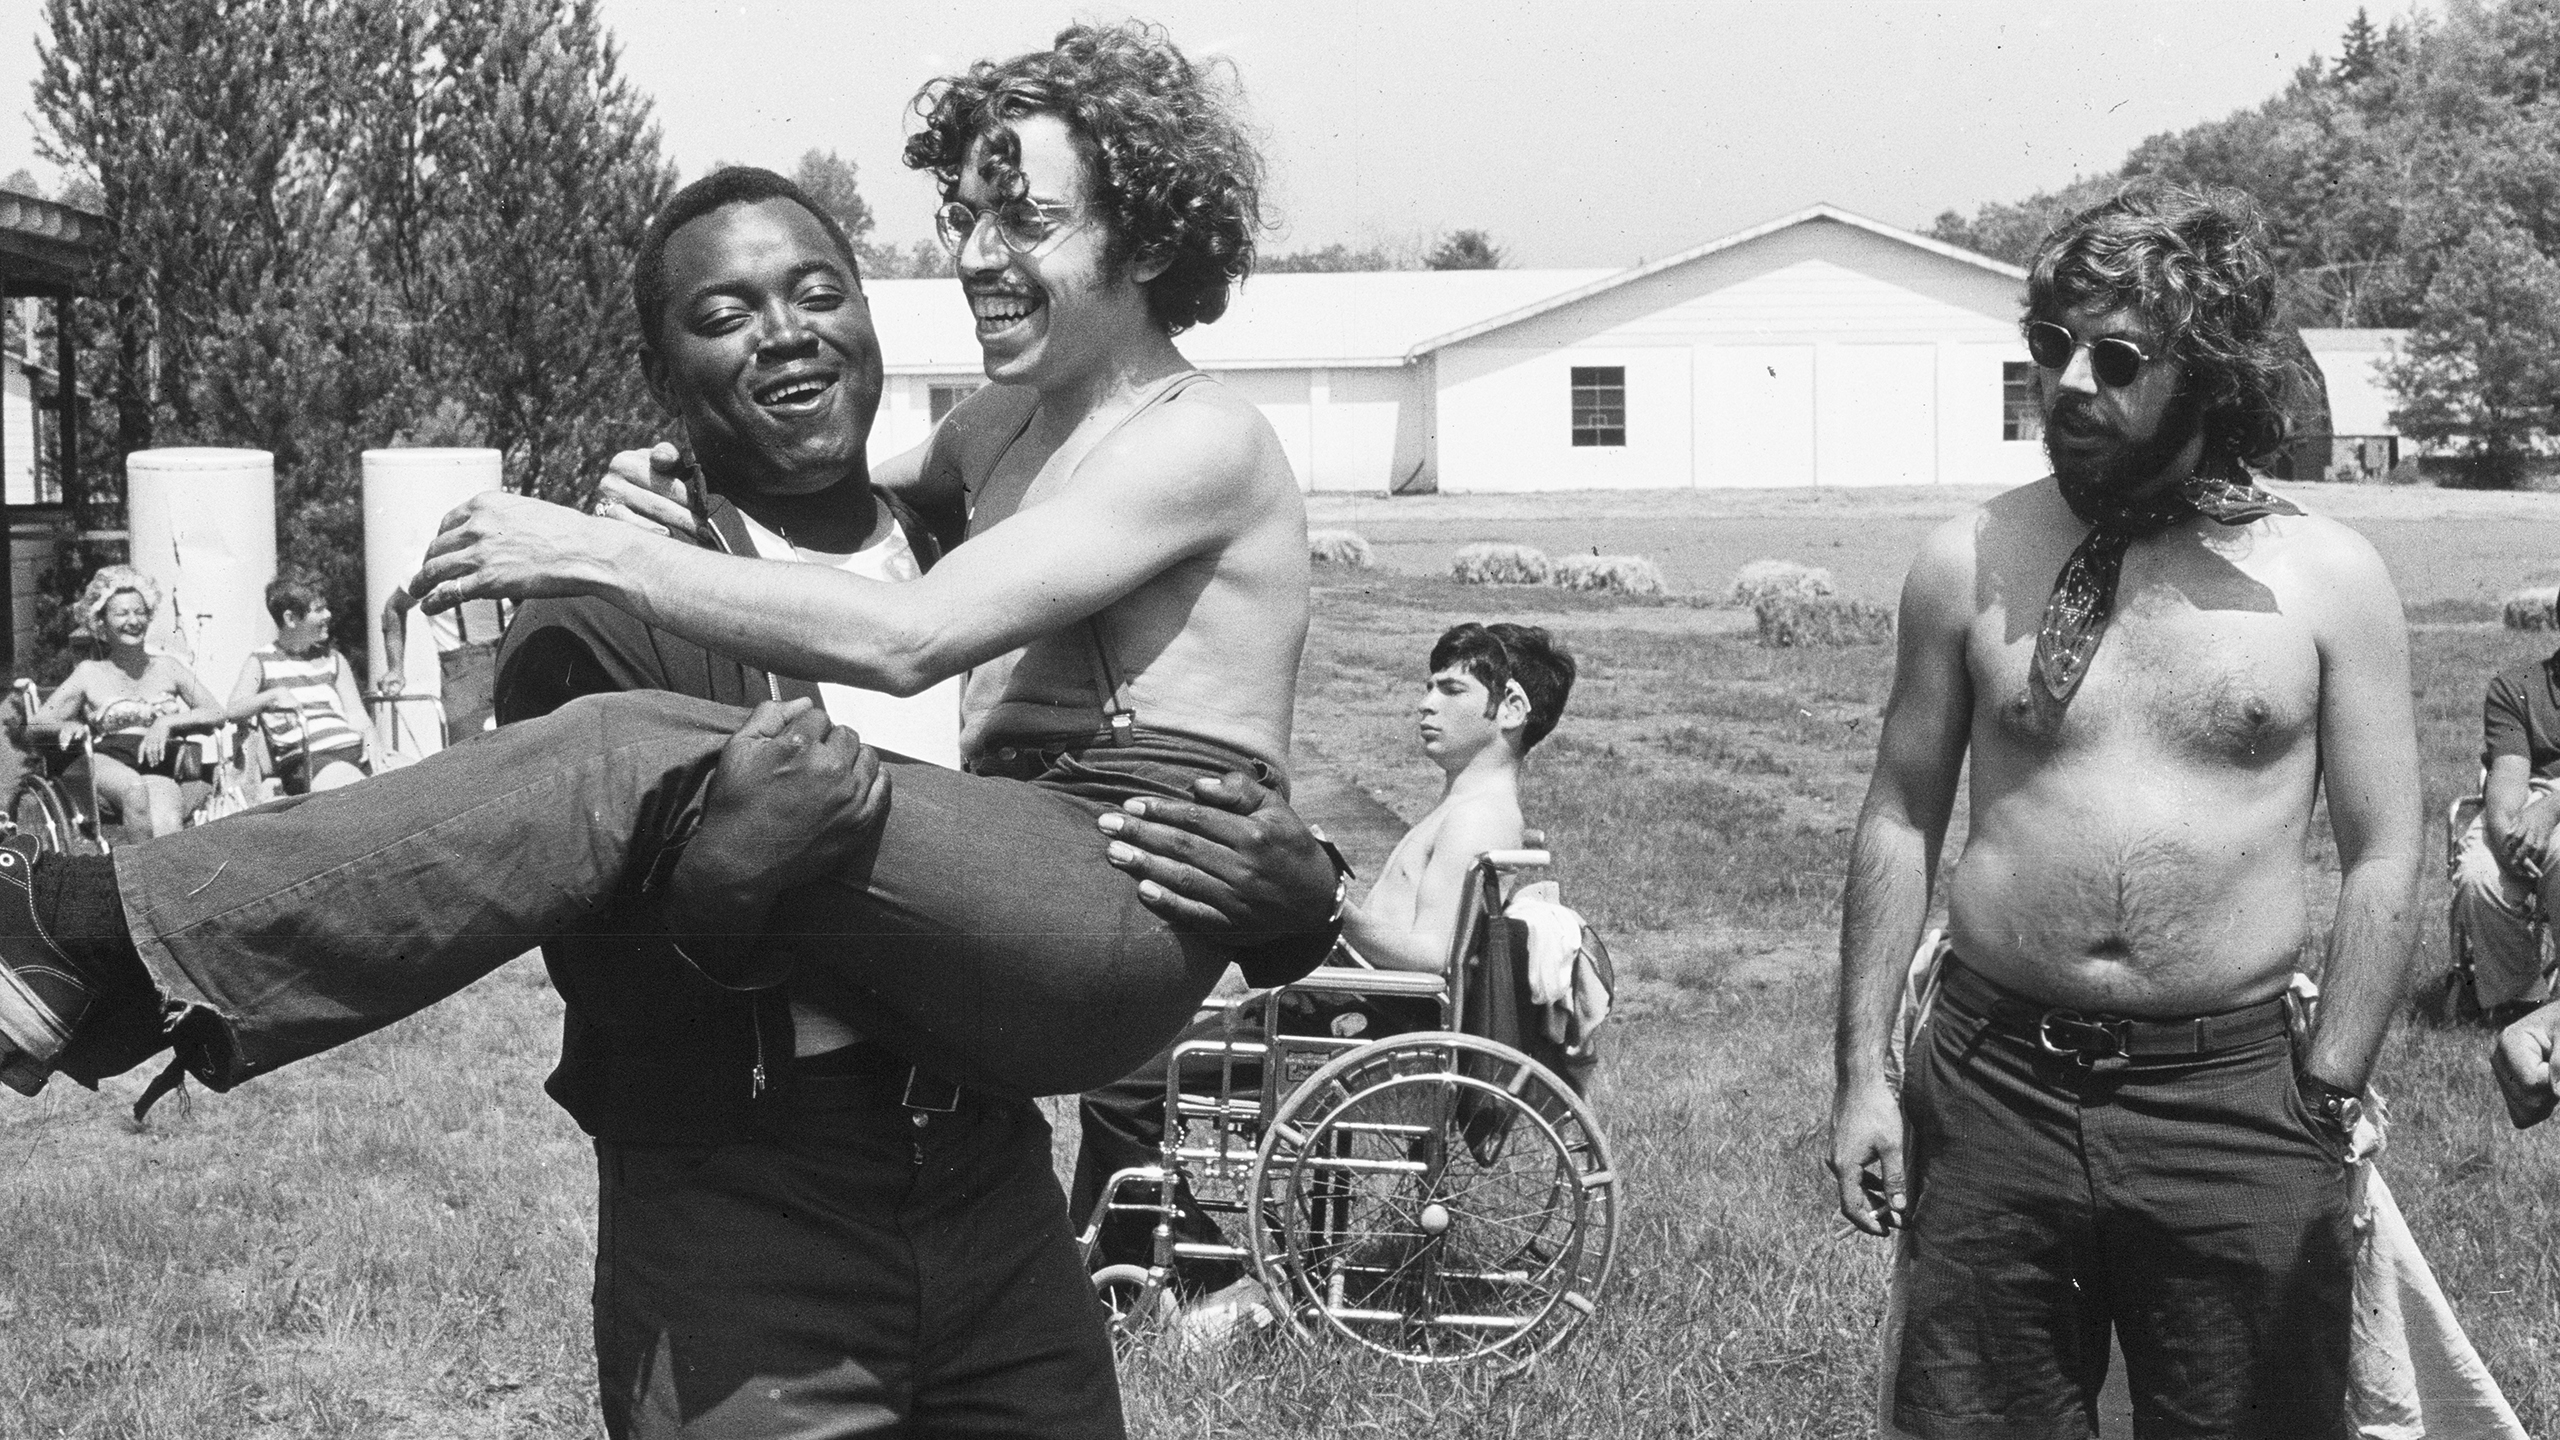 a black-and-white photo of people at Camp Jened, a summer camp for disabled people in the 1970s. A young man carries another young man while they laugh and as the shirtless director of the program looks on and campers in wheelchairs chat in the background.